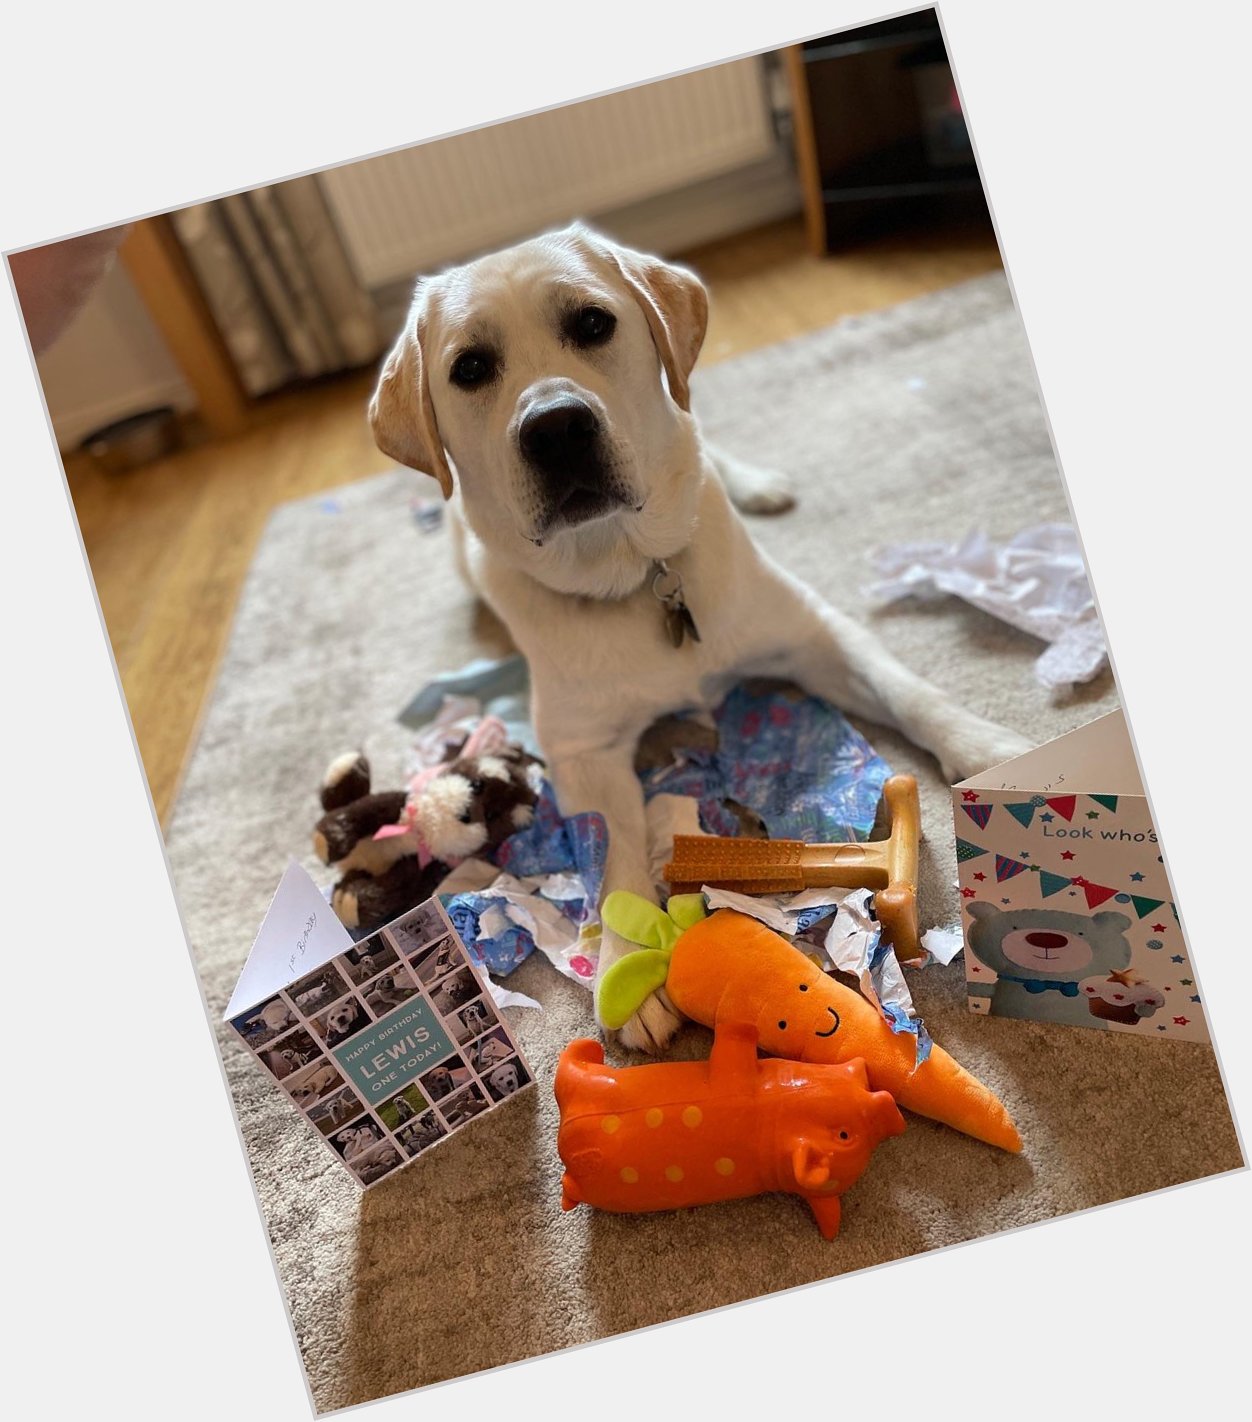 Happy 1st Birthday Lewis!
And what did Guide dog peoples get you? a date for your big boy op!  